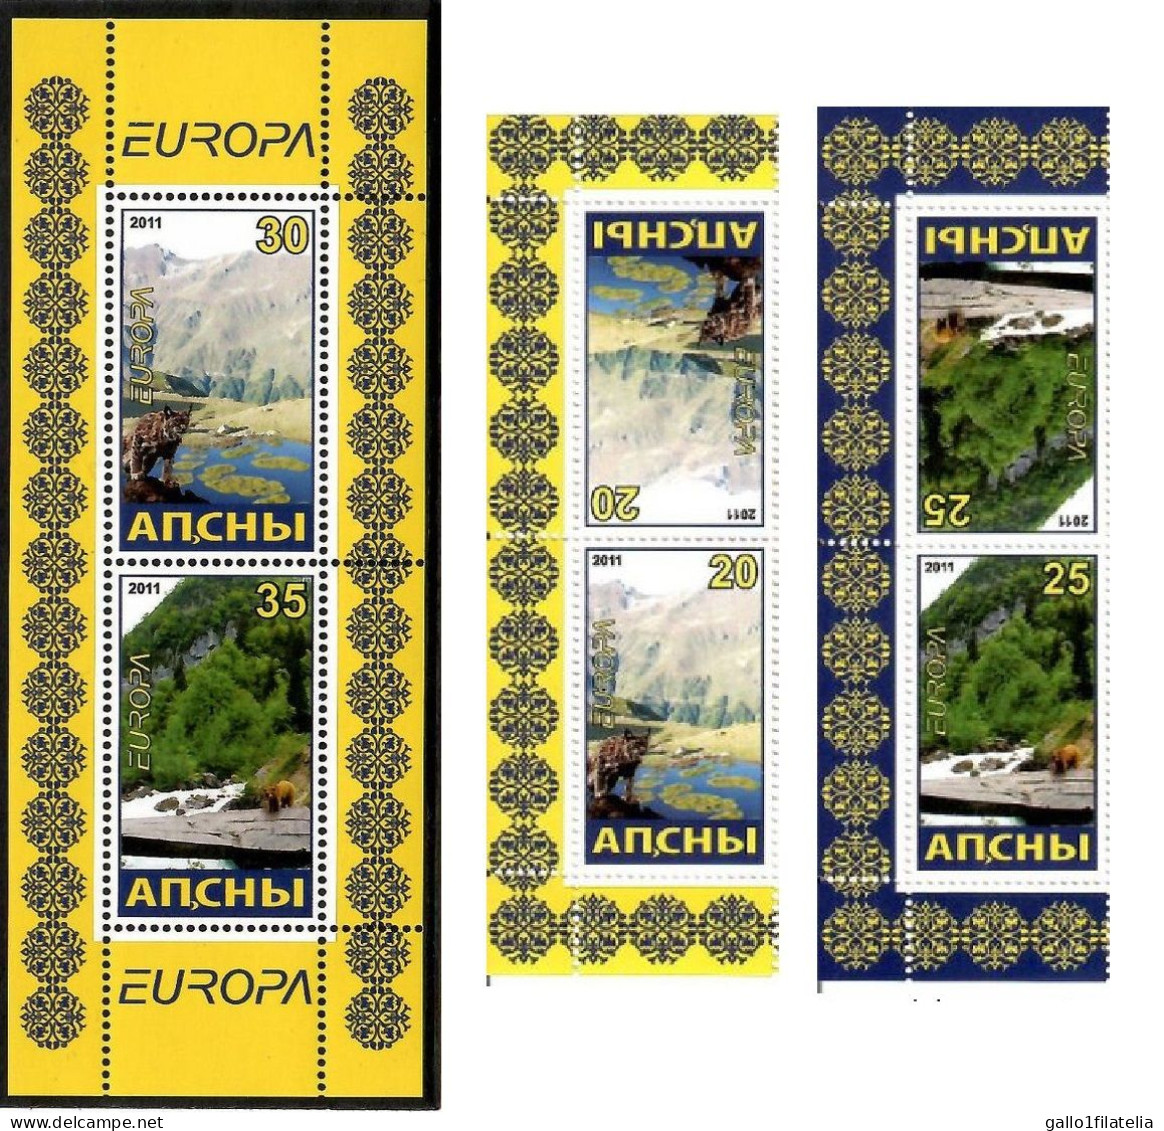 2011 - ABKHAZIA - EUROPA CEPT - LE FORESTE / THE FORESTS. MNH - 2011